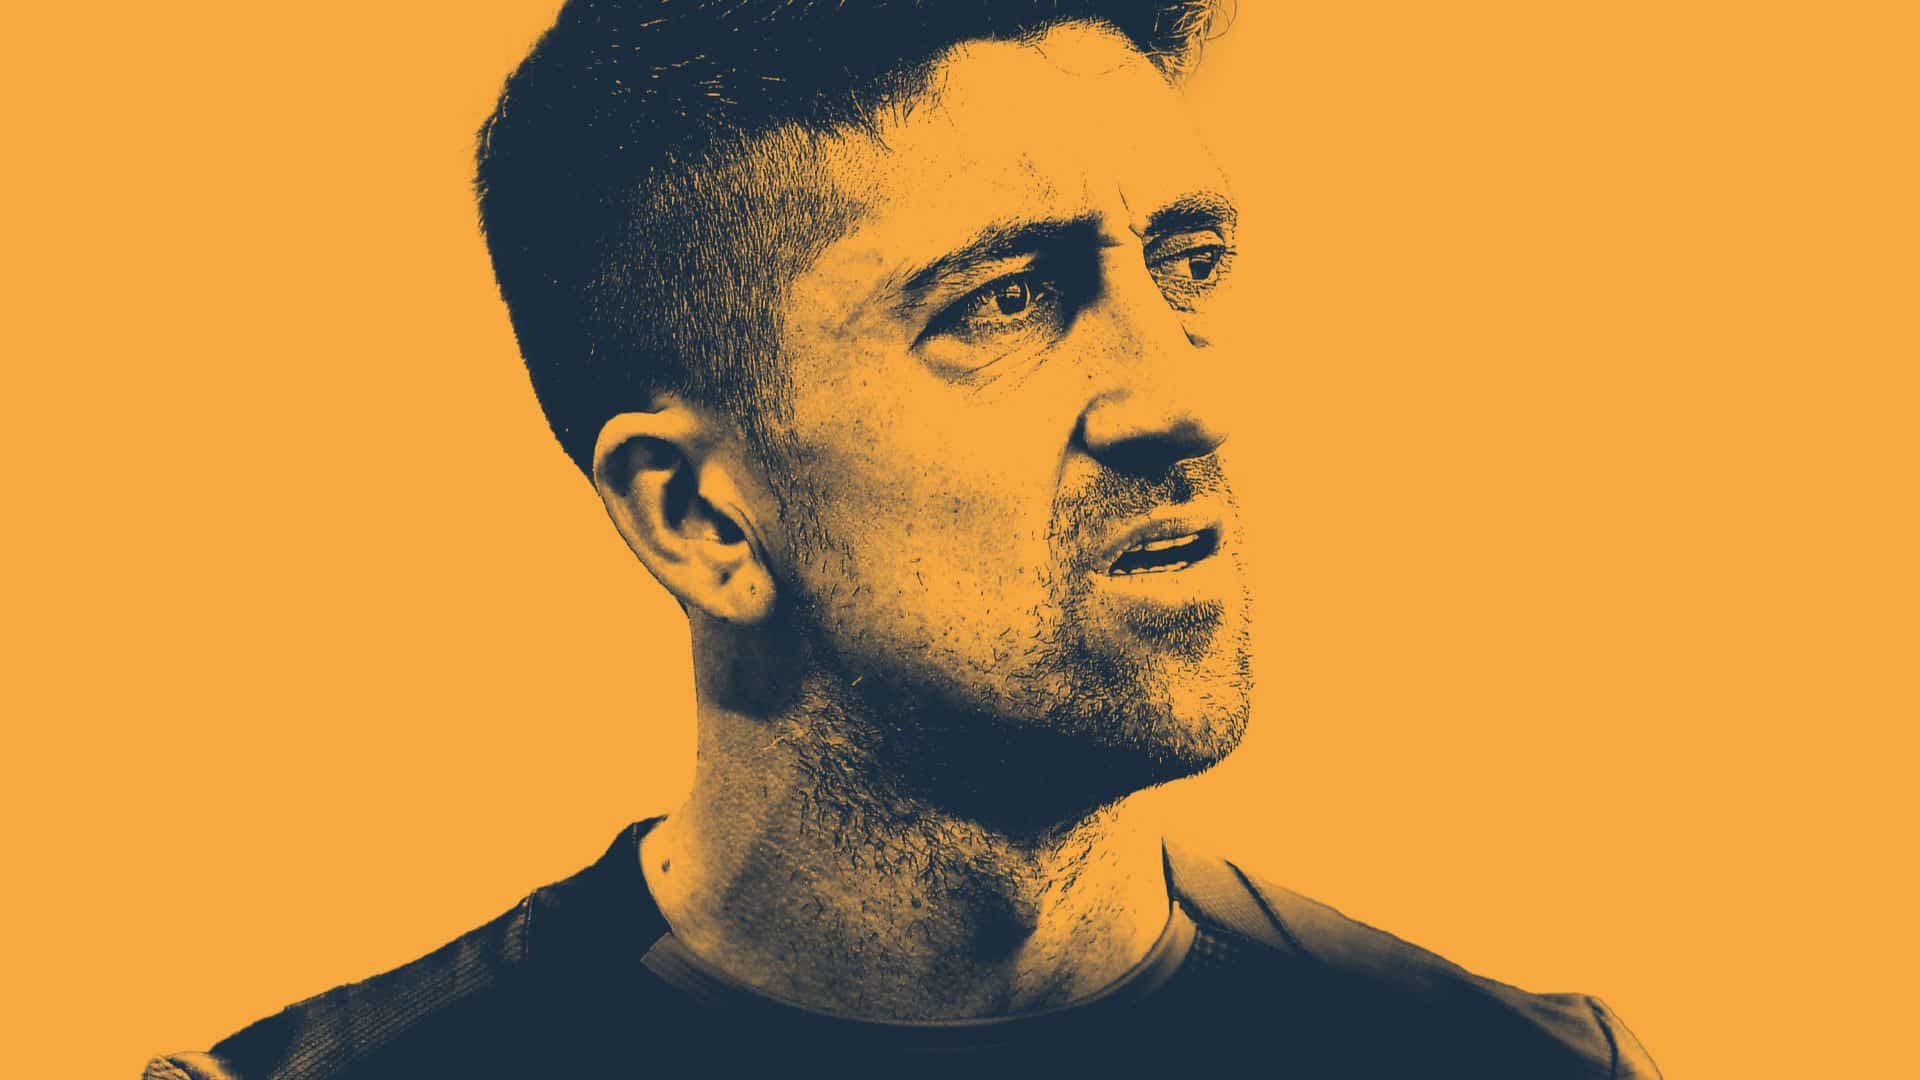 A close up of Pablo Hernandez's face, he's looking askance as usual, decoloured and set against a desert yellow background